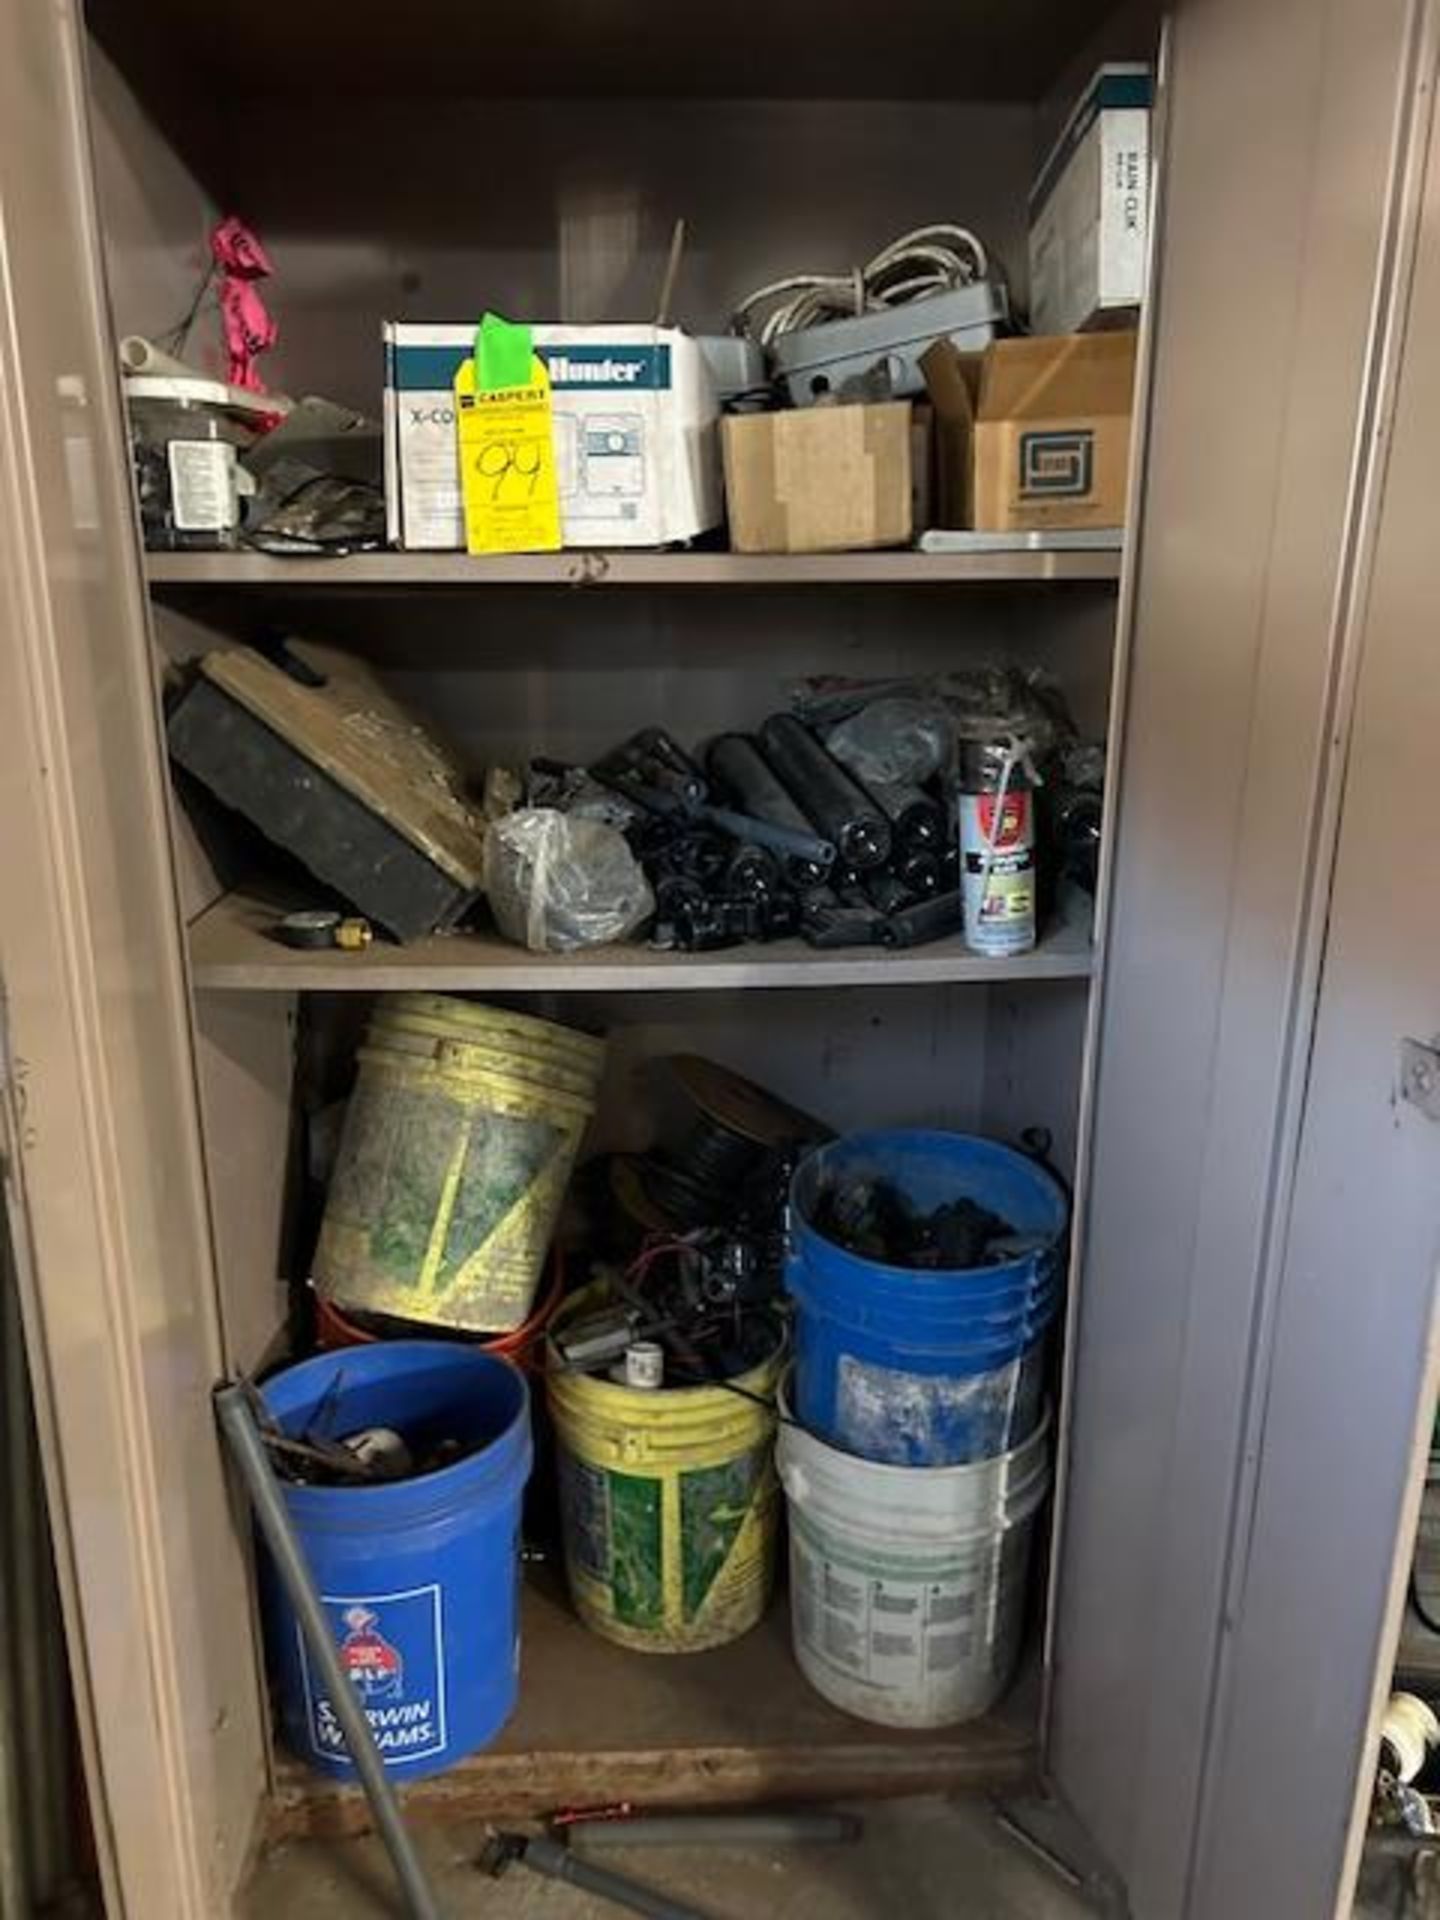 Cabinet with Sprinkler and Irrigation Parts